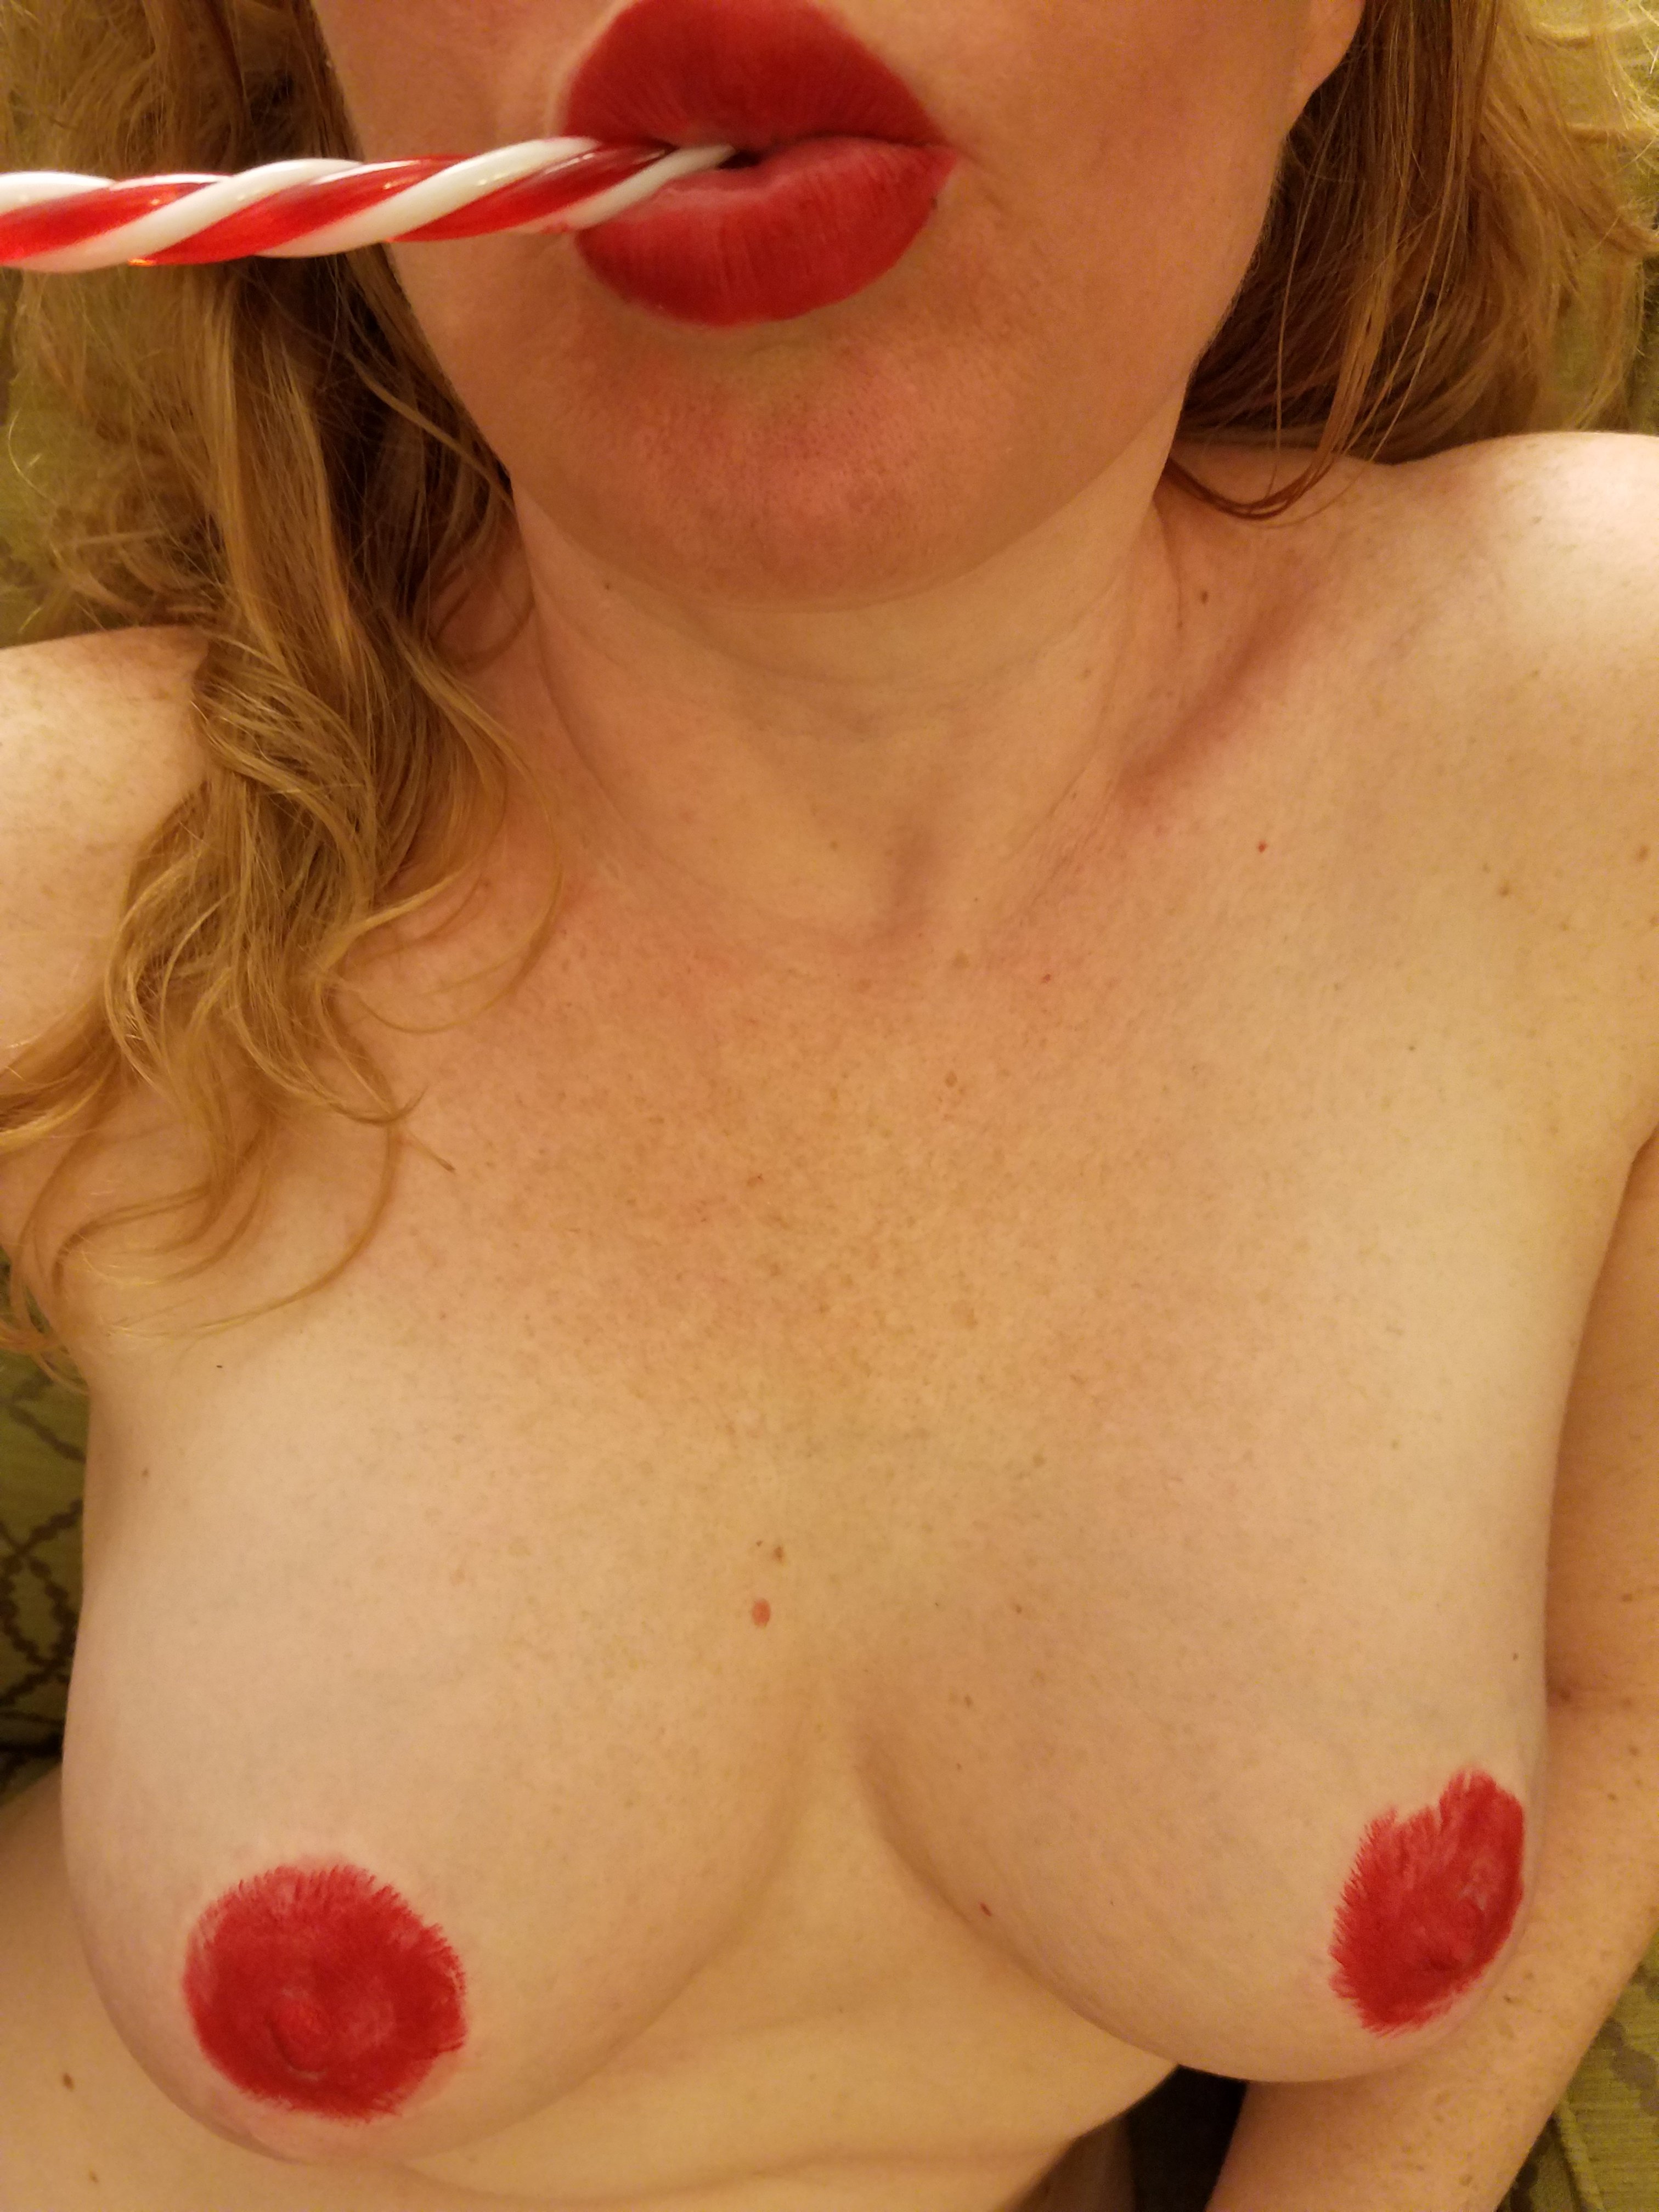 Naked girl with red lips and lipstick nipples suck a candy cane